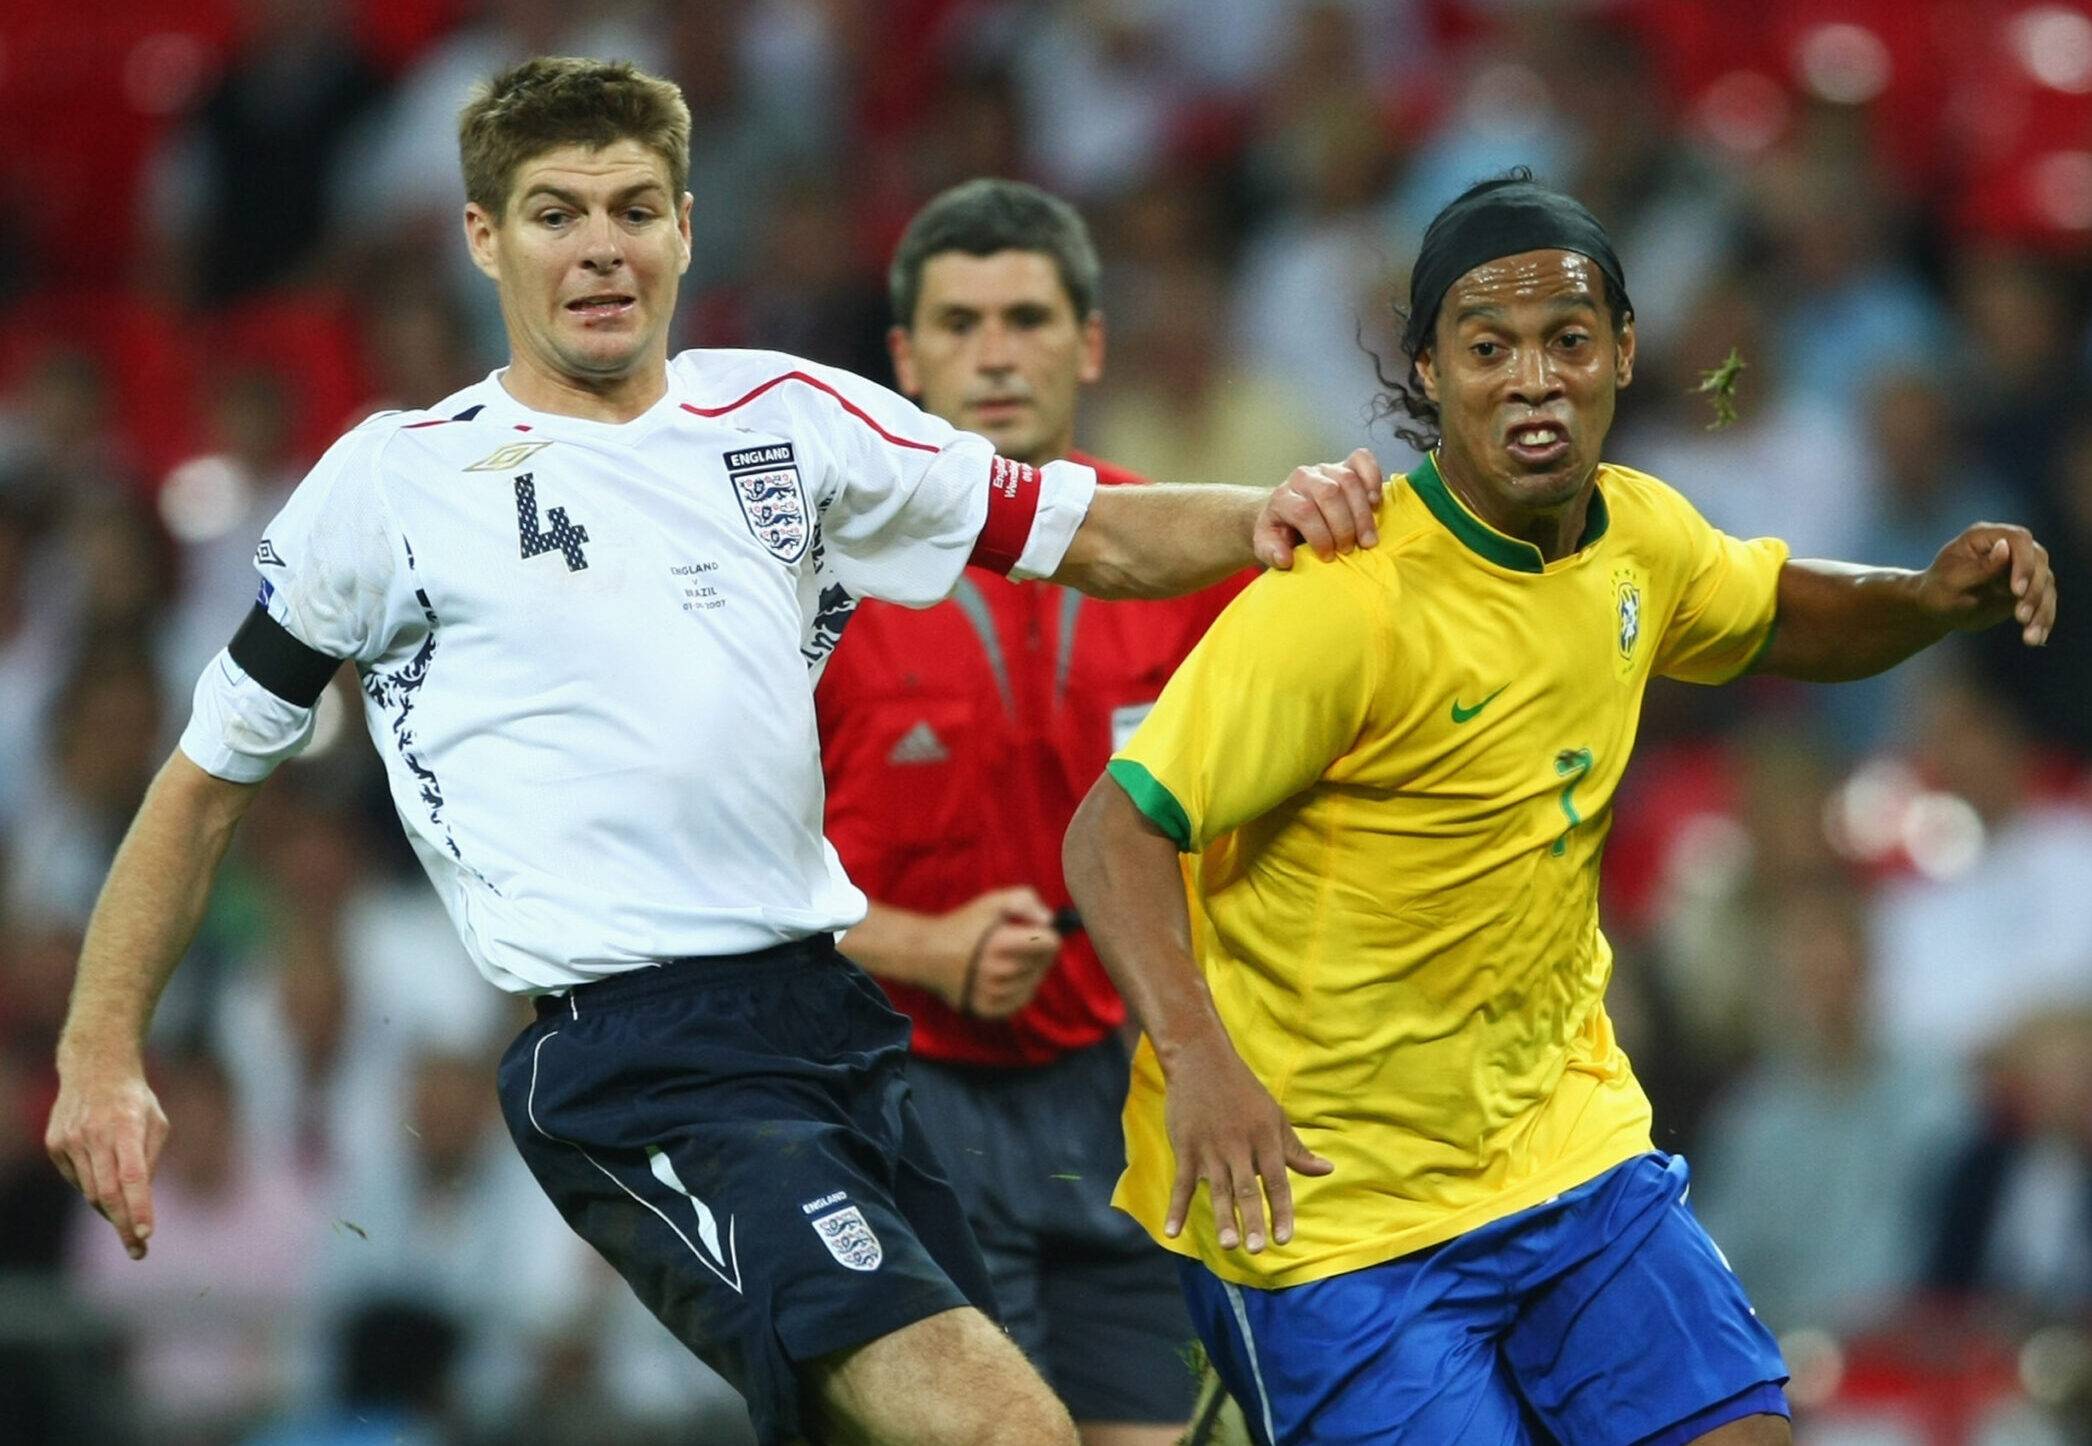 The day Ronaldinho showed Steven Gerrard he was on another level in front of 90,000 at Wembley